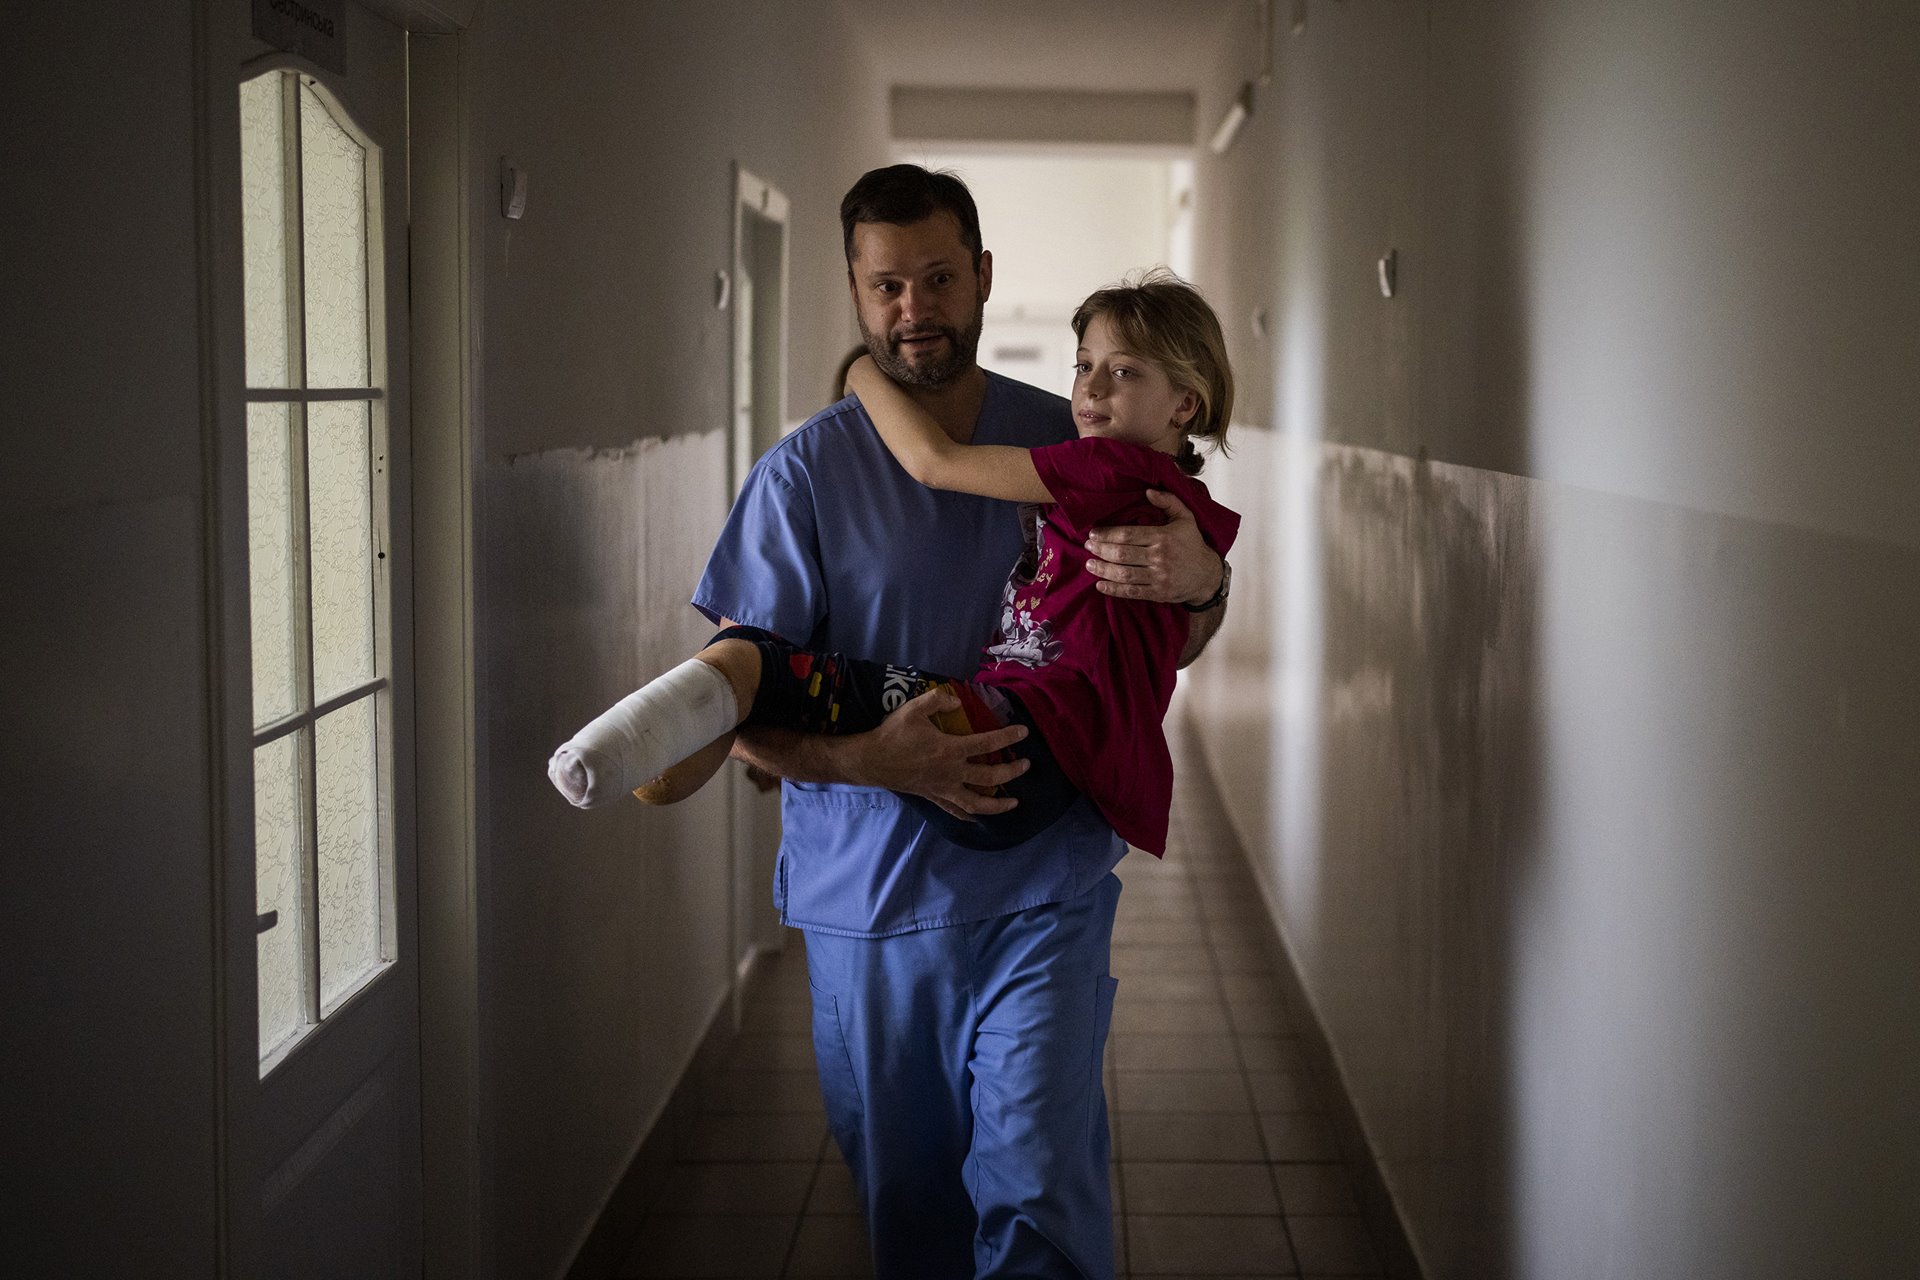 Yana Stepanenko (11) is carried by a doctor at a public hospital in Lviv, Ukraine. Yana, her mother Natasha (43), and her twin brother Yarik (11) were injured during shelling of a train station in the eastern city of Kramatorsk, on 8 April. According to the UN Human Rights Office, some 60 civilians were killed, and 110 wounded in a Russian missile strike on the station. Thousands of civilians were gathered there, awaiting evacuation. Russia denied involvement, claiming the strike was orchestrated by Ukraine. The family were later flown to San Diego, in the United States, where Yana and Natasha received new prostheses, and Yana underwent surgery.